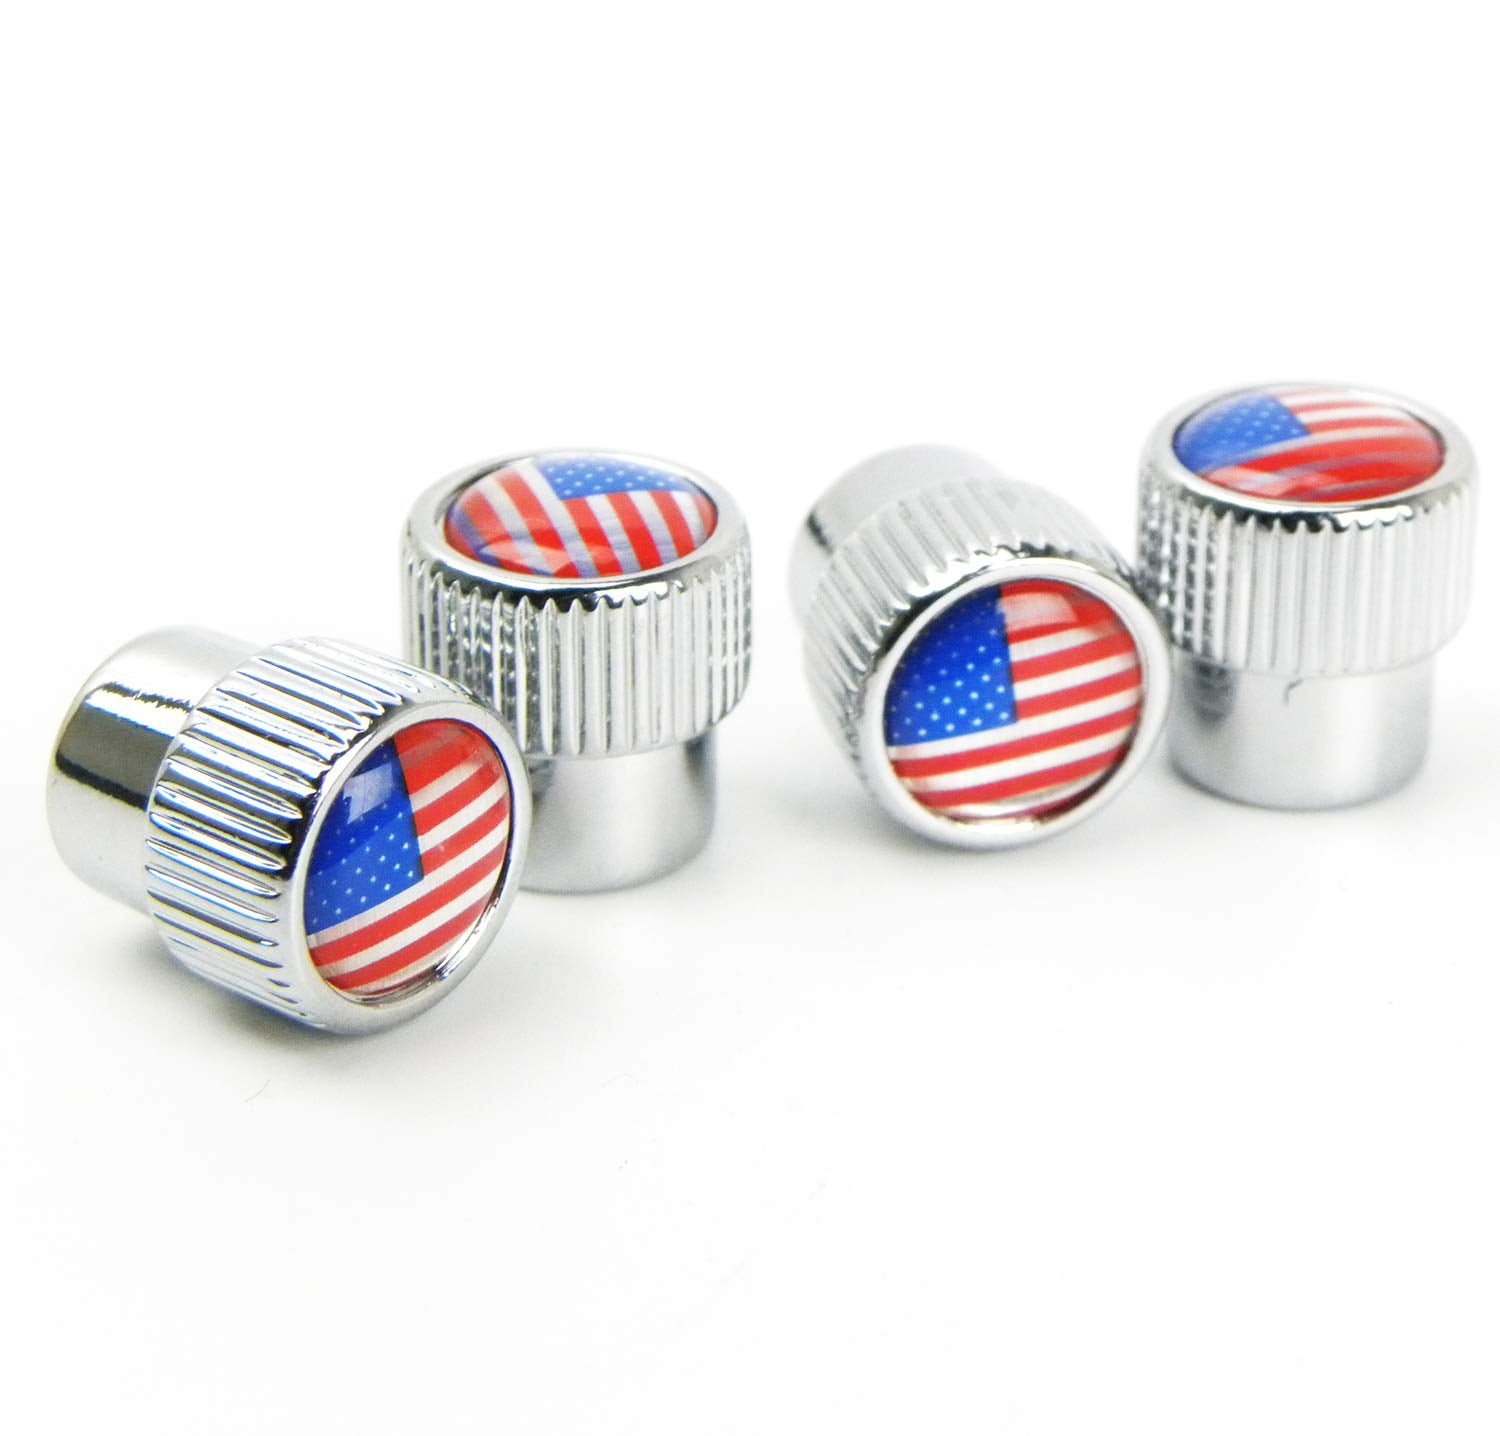 Trucks American Flag Valve Stem Cap Bikes Black Subdued USA Aluminum with Rubber Ring Tire Wheel Rim Dust Cover fits Cars 4 Pack Motorcycles Bicycles 